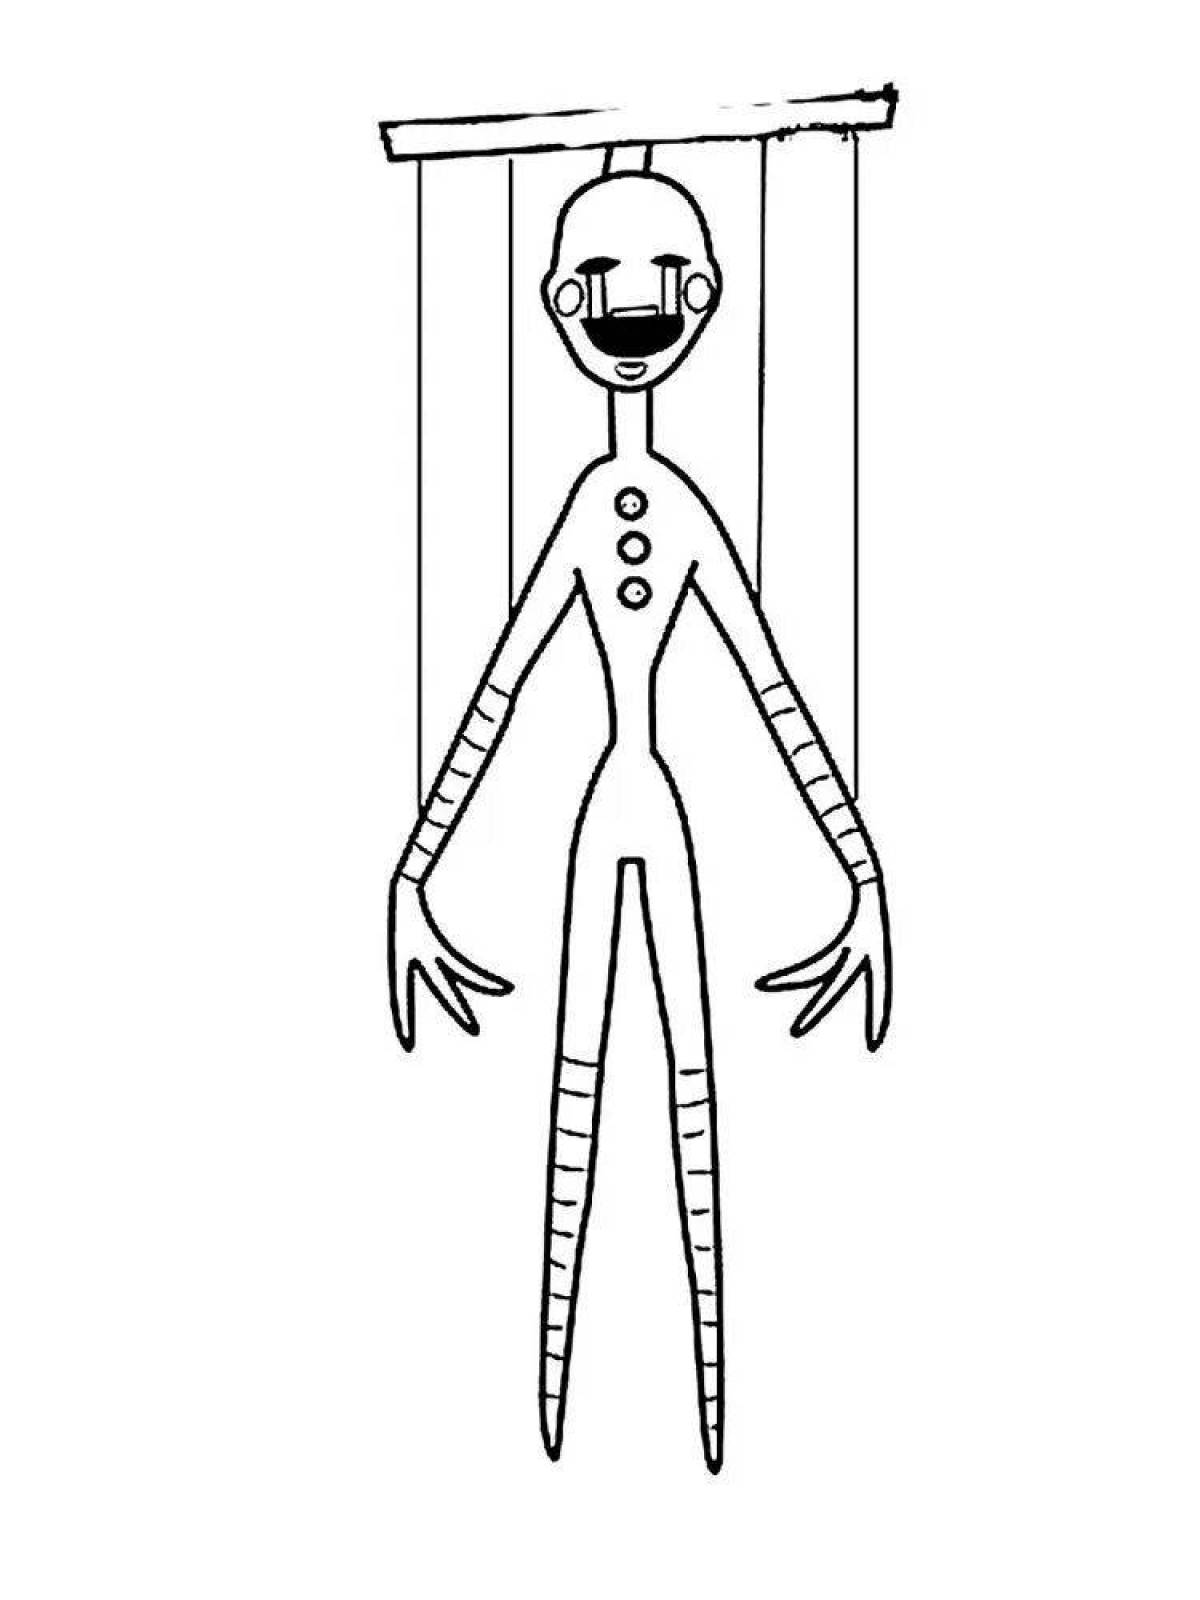 Coloring page joyful daddy with long legs